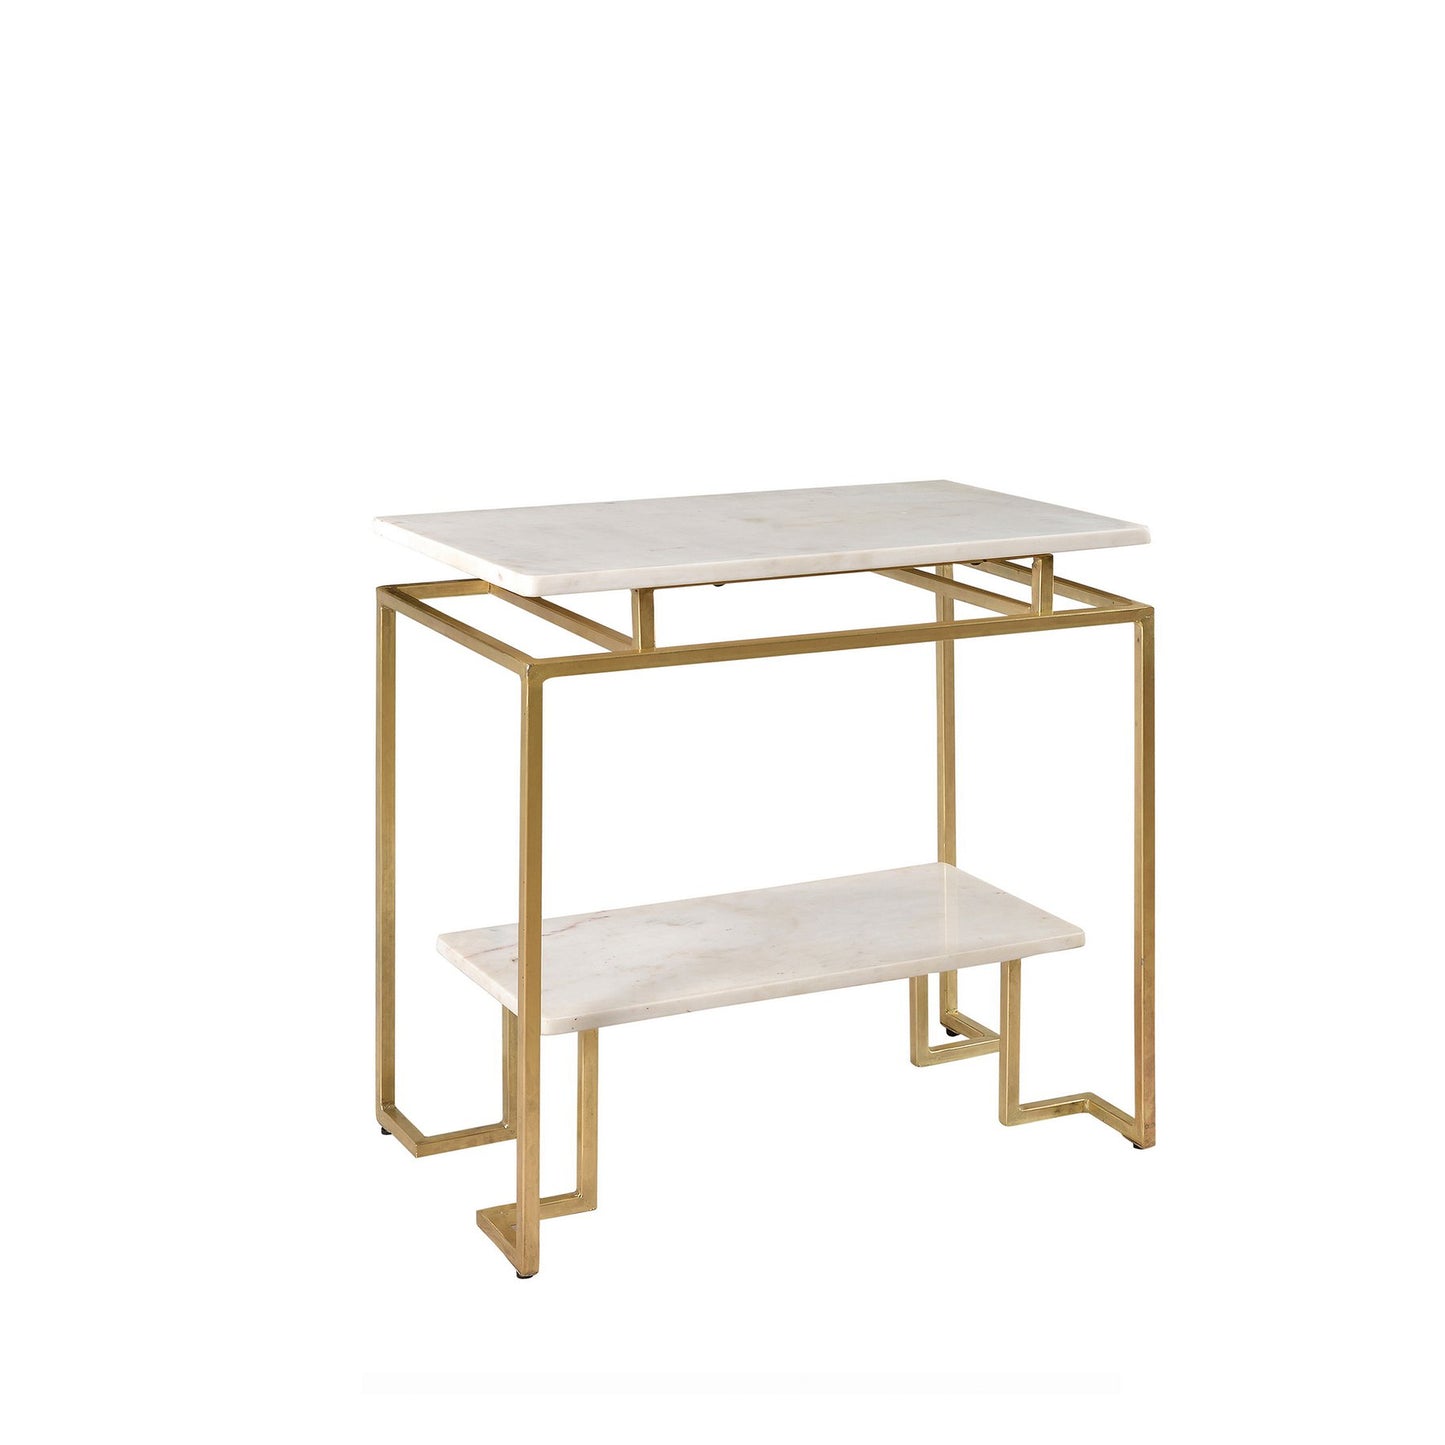 93410 accent table - Dreamart Gallery